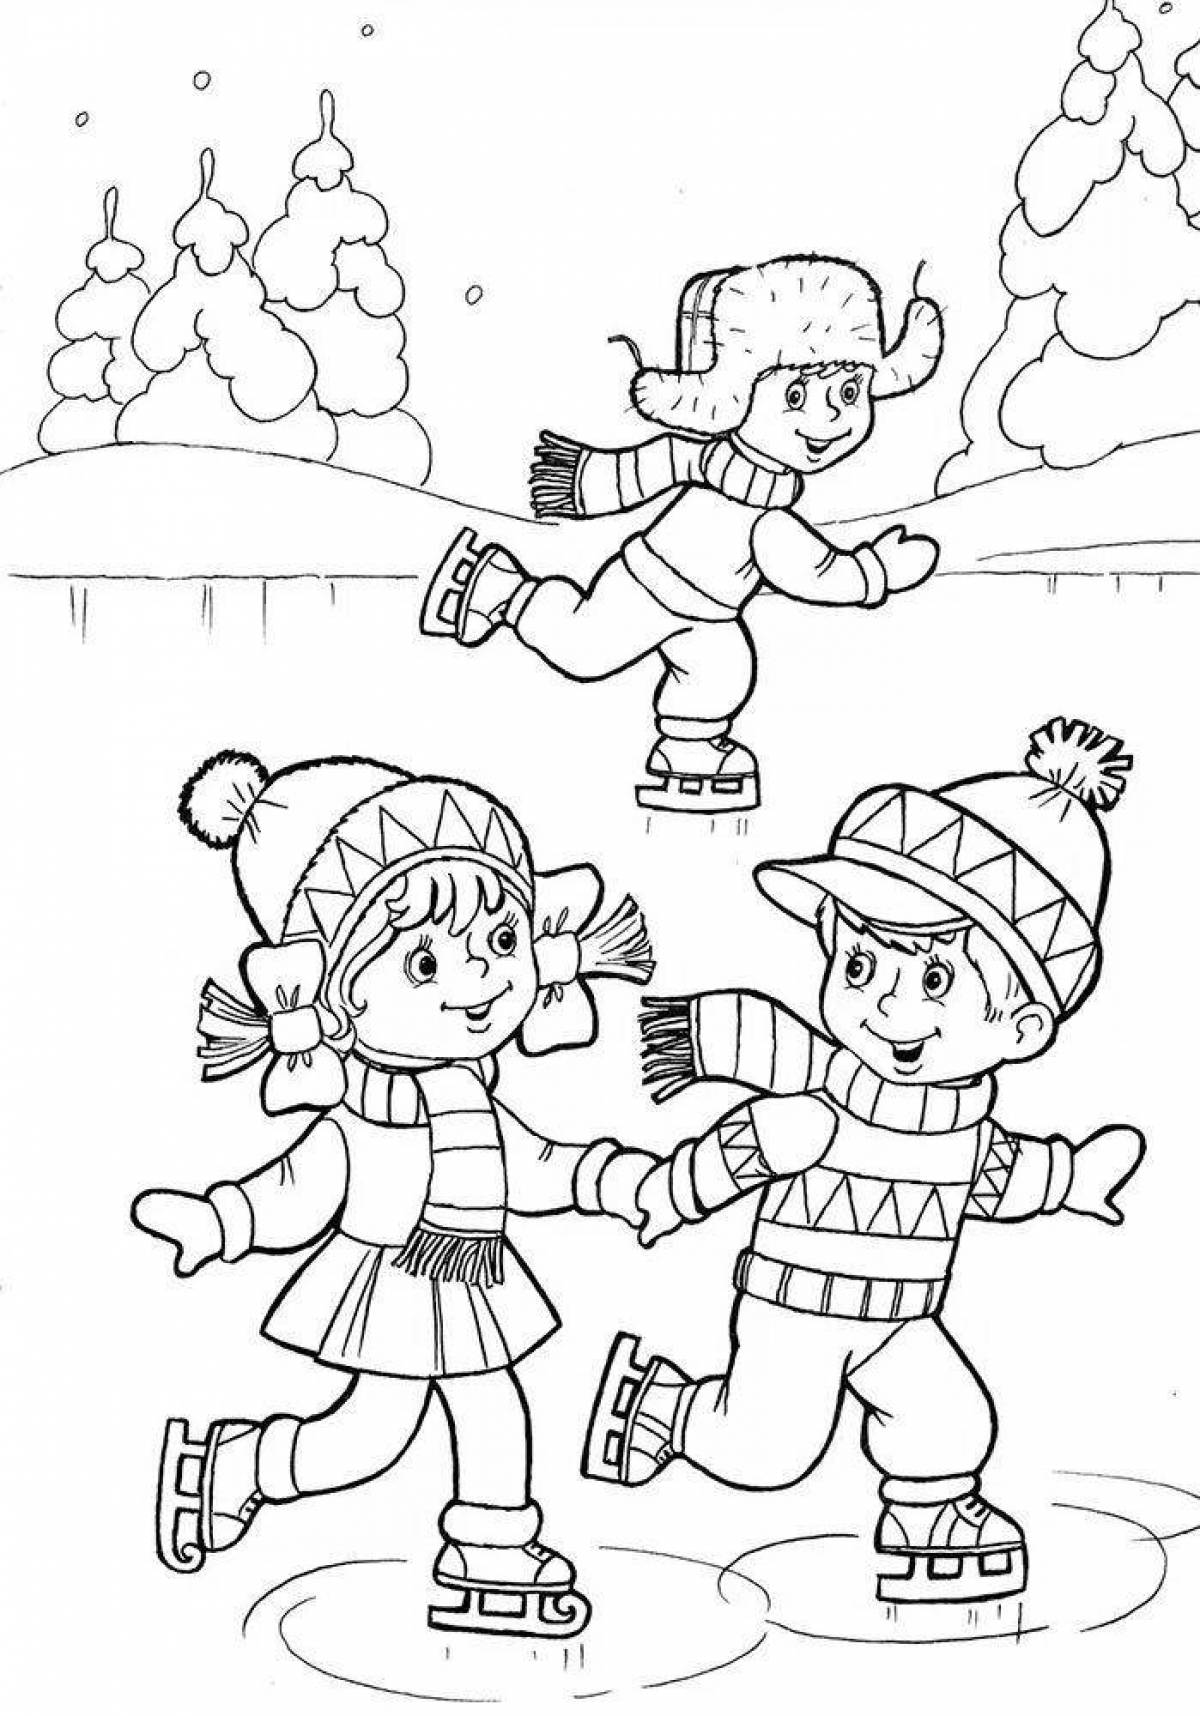 Dreamy winter coloring for children